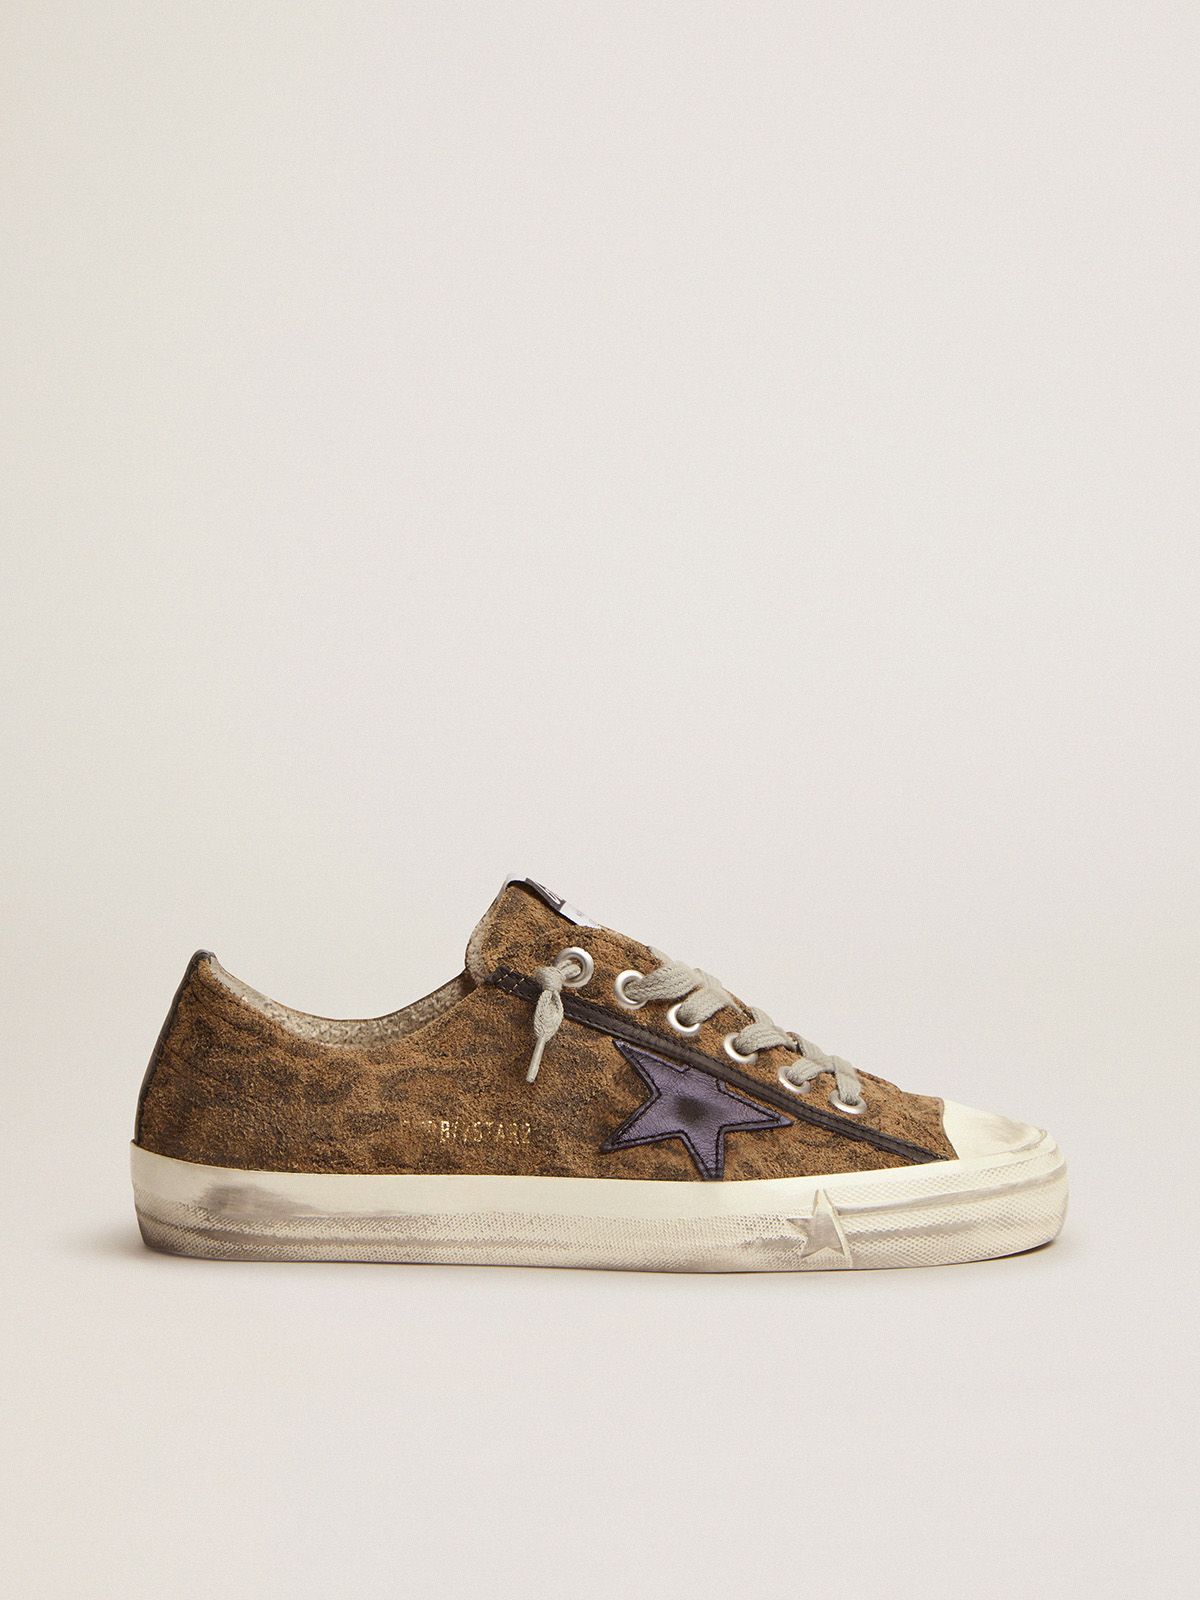 Uomo Golden Goose V-star LTD sneakers in leopard-print suede with a black laminated leather star